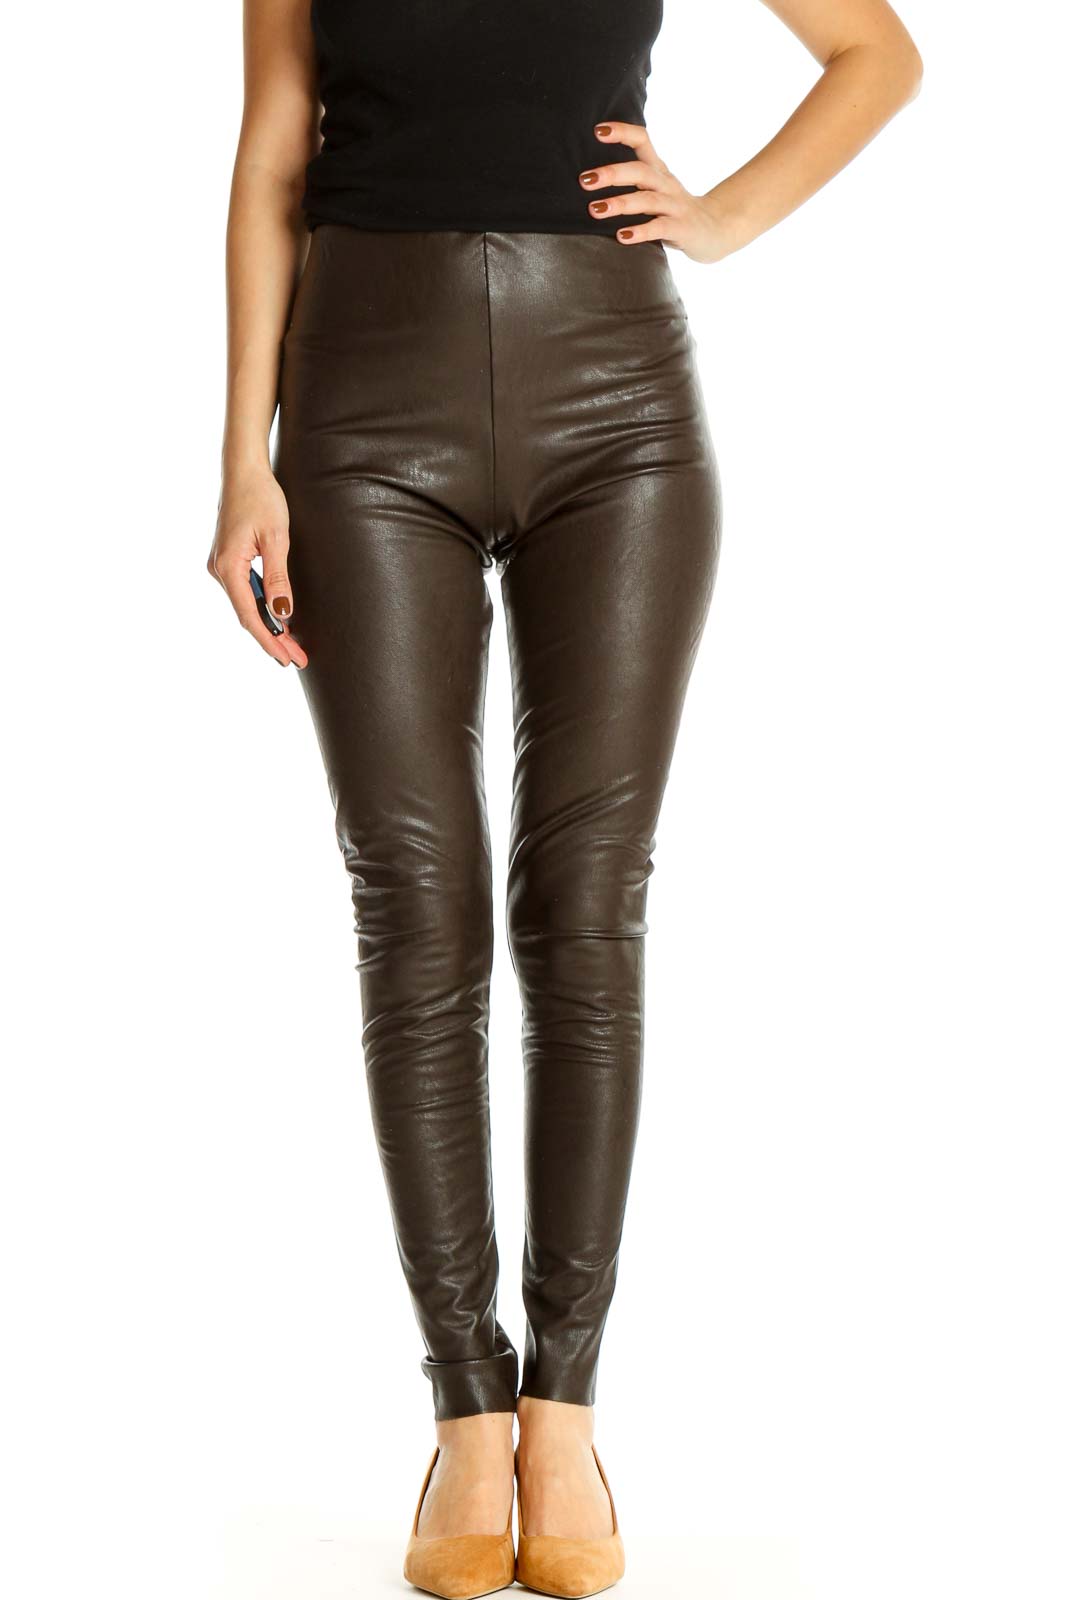 Brown Solid Casual Leggings Front